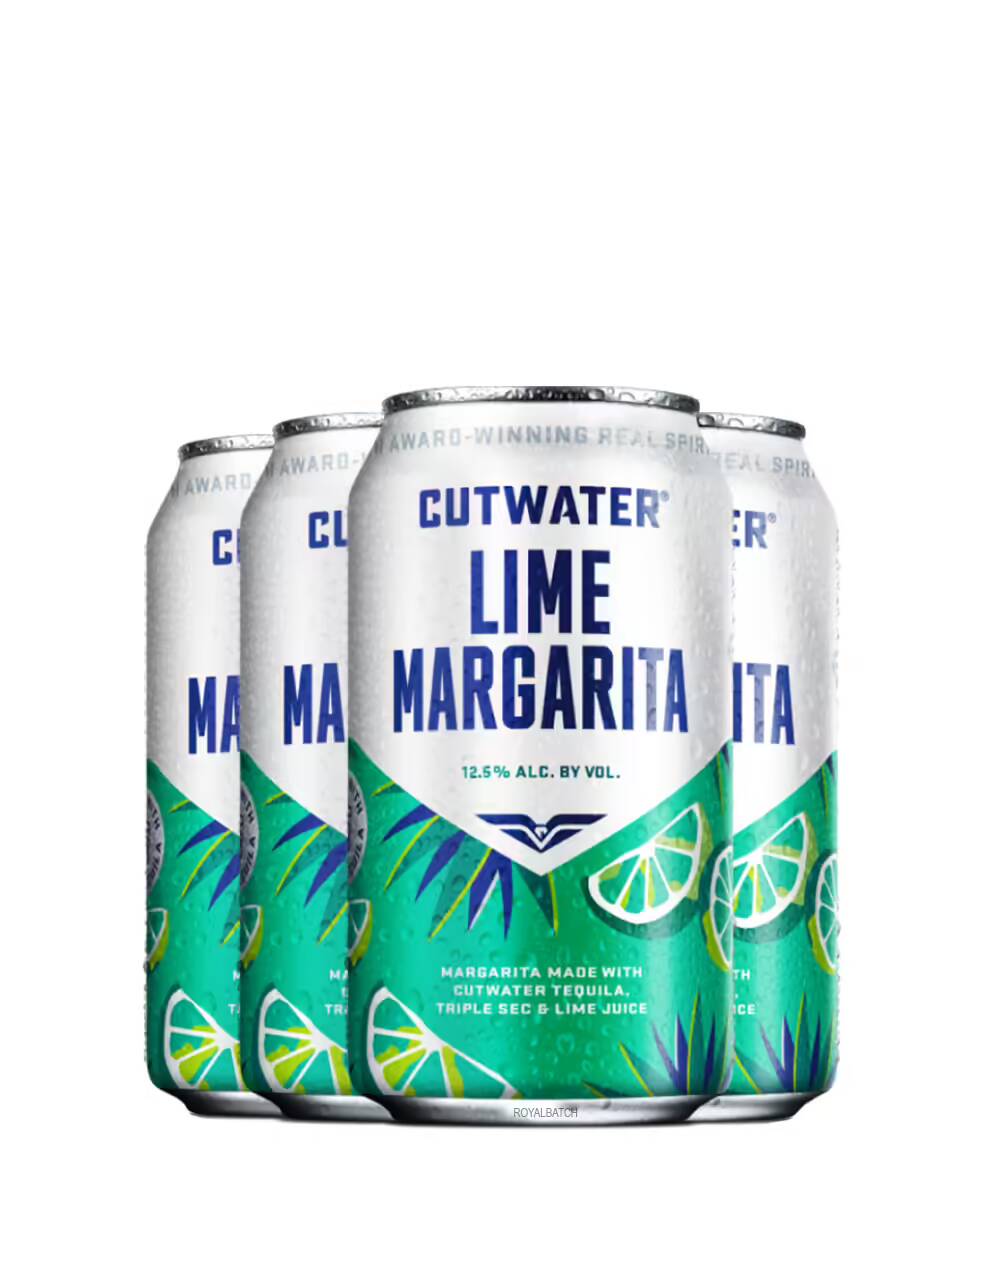 Cutwater Lime Tequila Margarita Canned Cocktails (4 Pack) 355ml